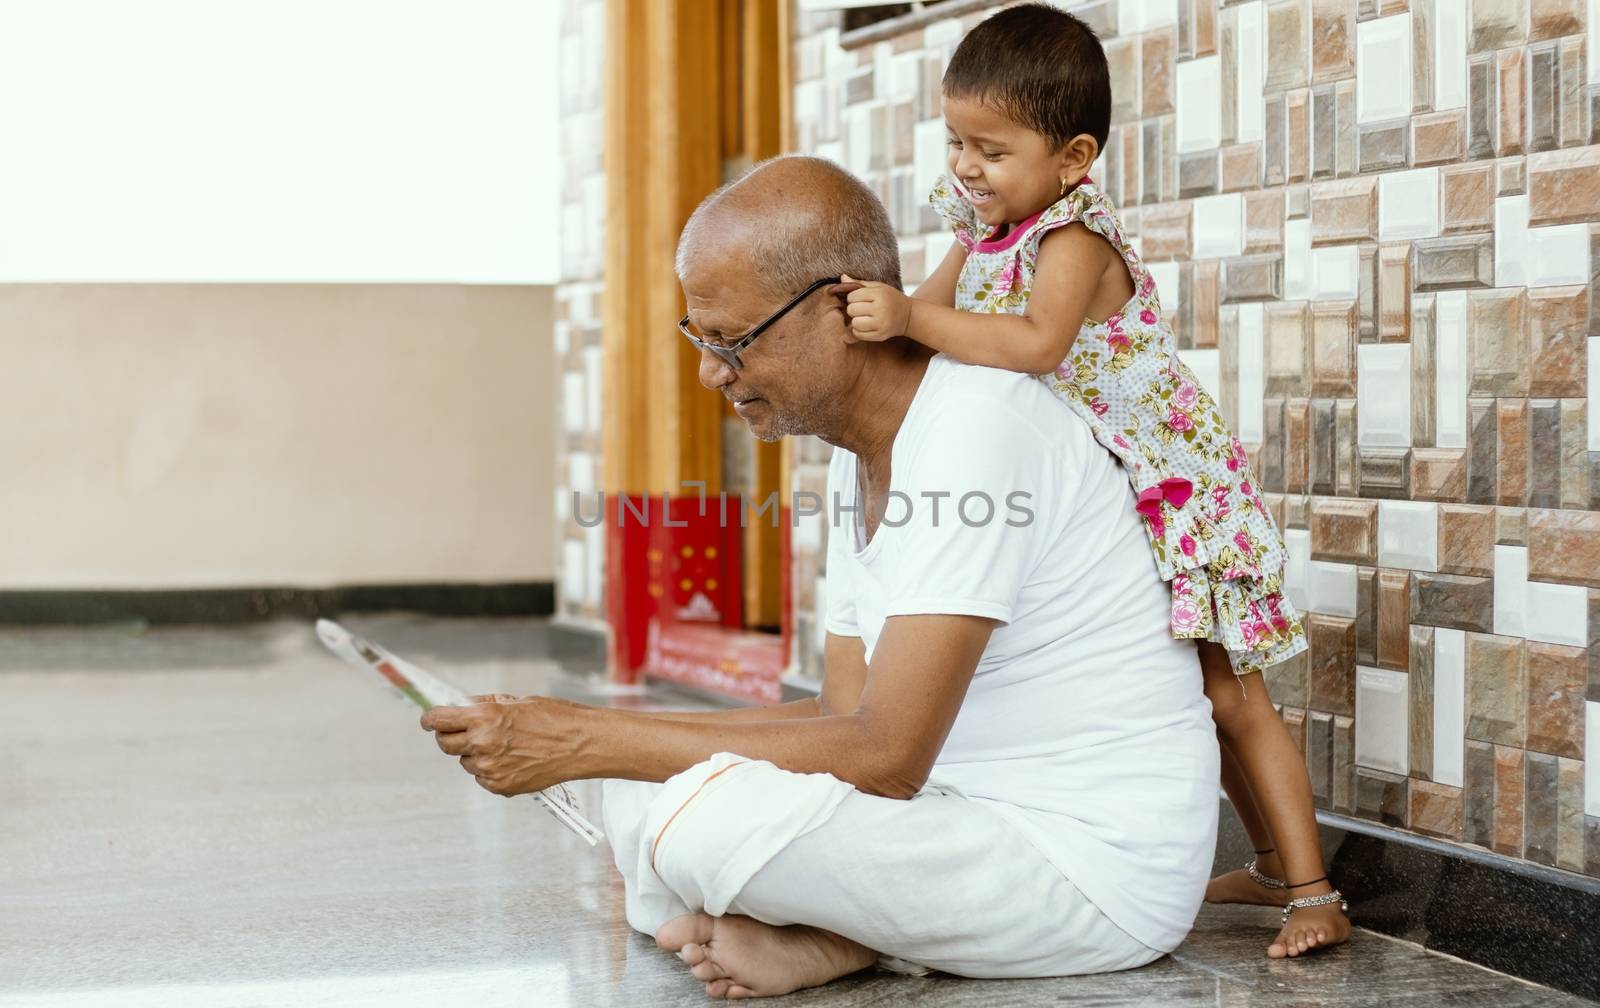 Little Granddaughter playing with grandfather by pulling grandpa's ears at home - concept of togetherness, fun, happiness and kids relationship with grandparents. by lakshmiprasad.maski@gmai.com